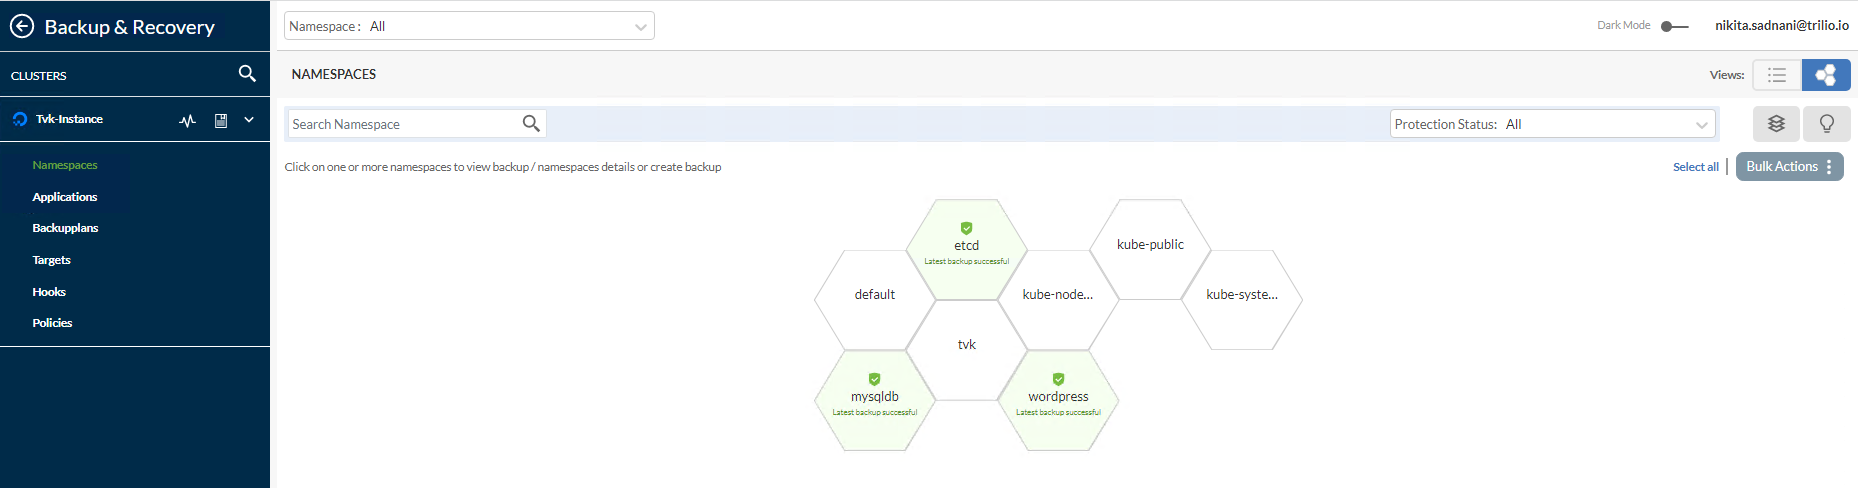 Screencapture showing the honeycomb view of the namespaces